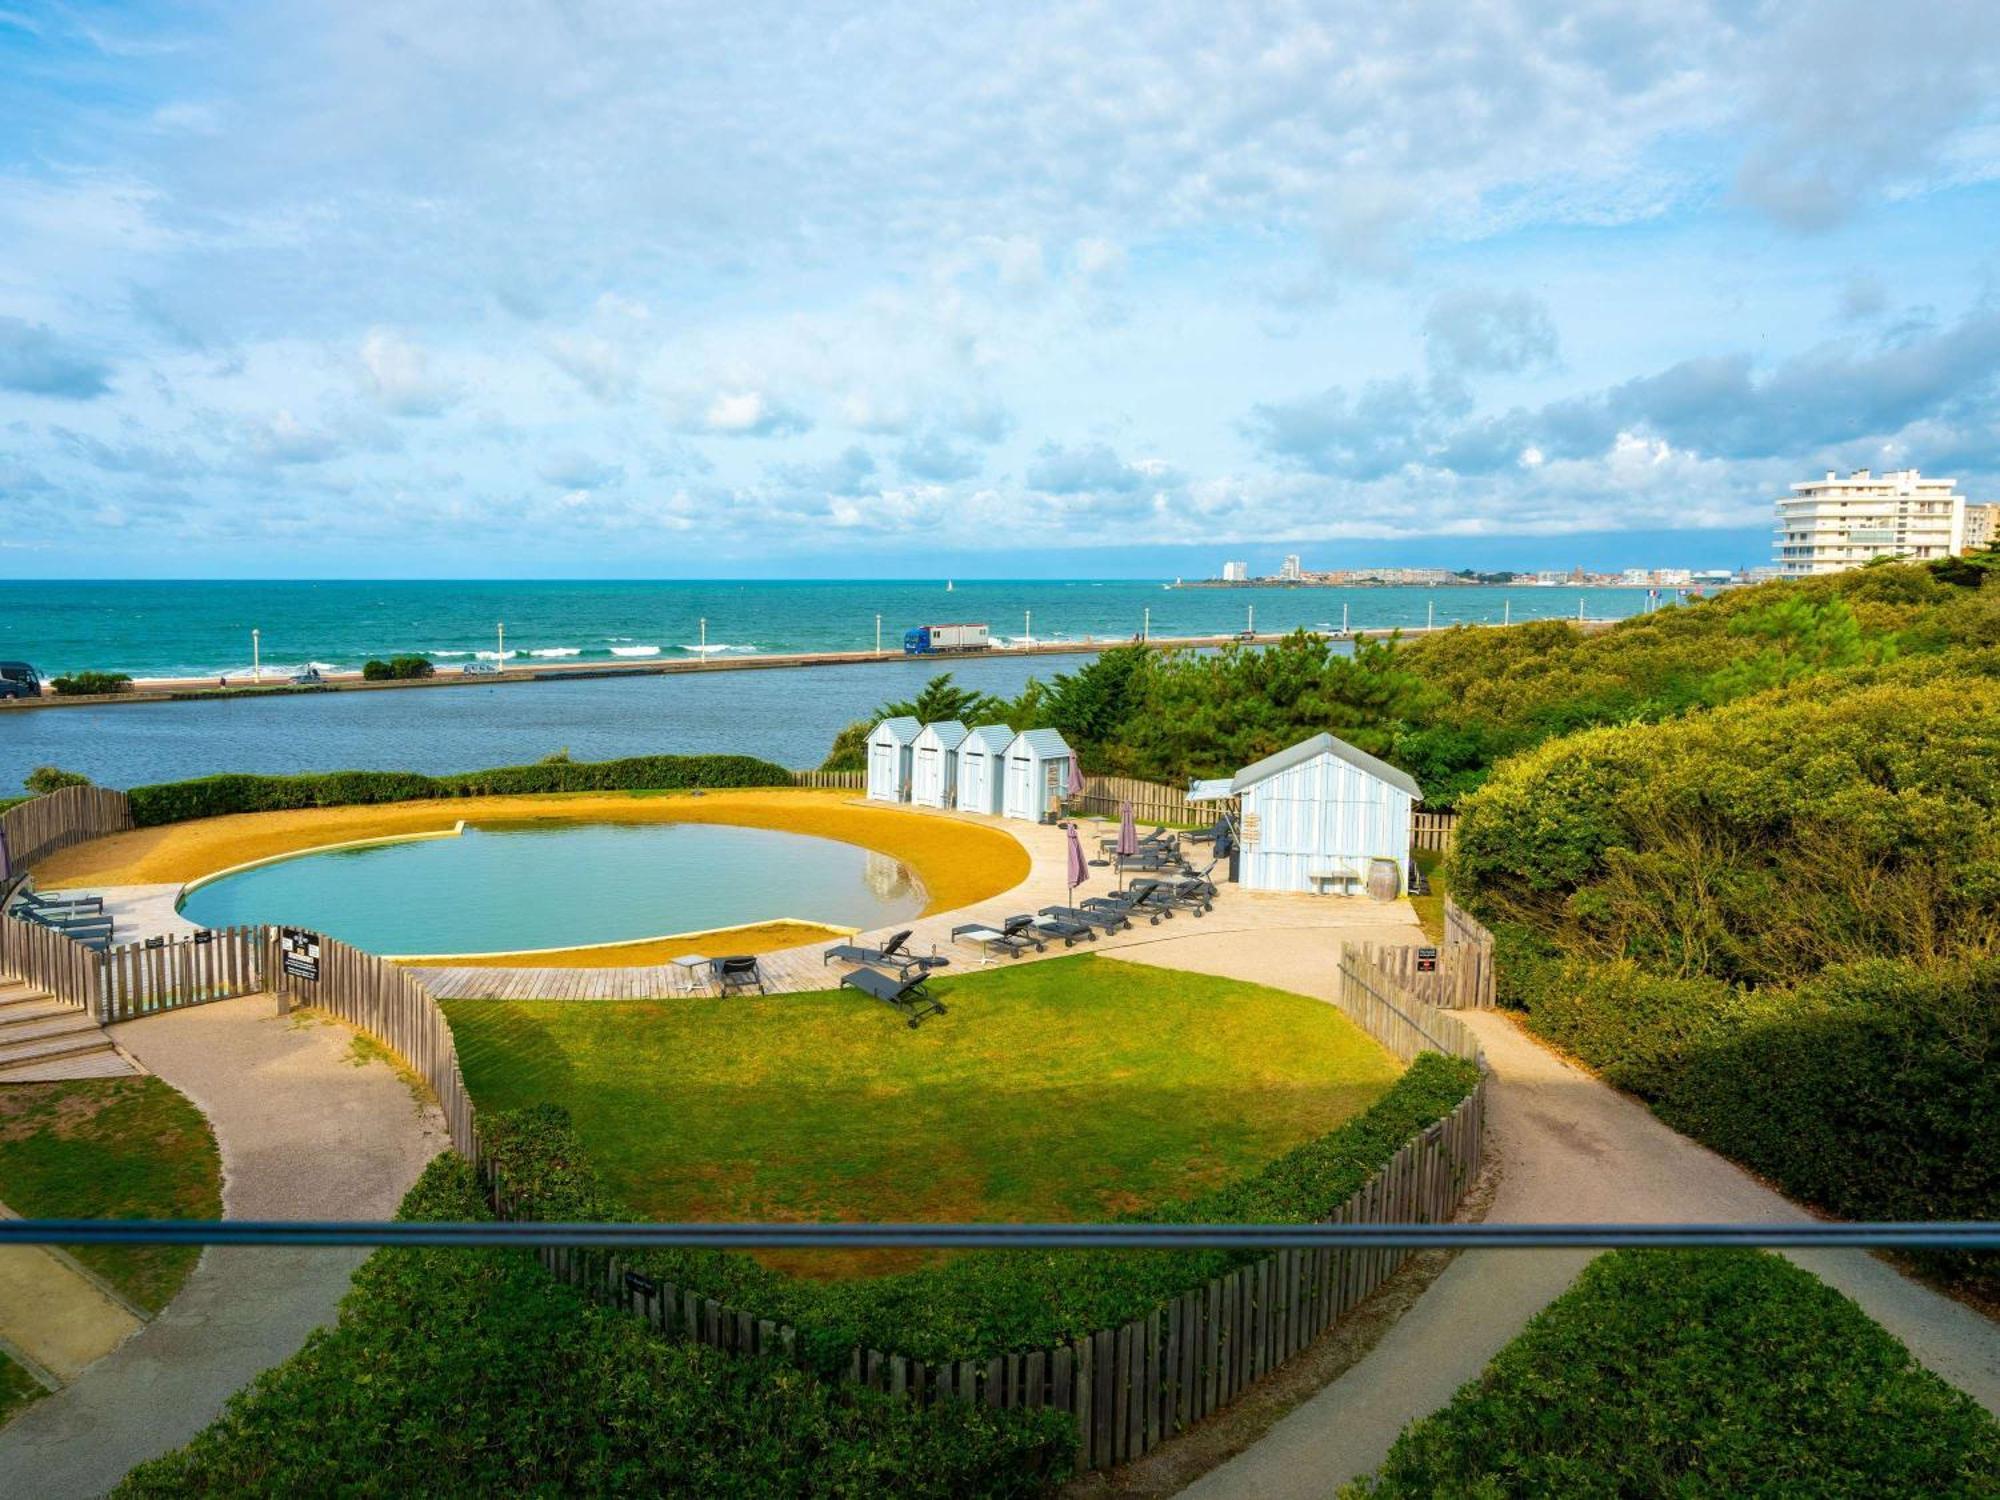 Cote Ouest Hotel Thalasso & Spa Les Sables D'Olonne - Mgallery 外观 照片